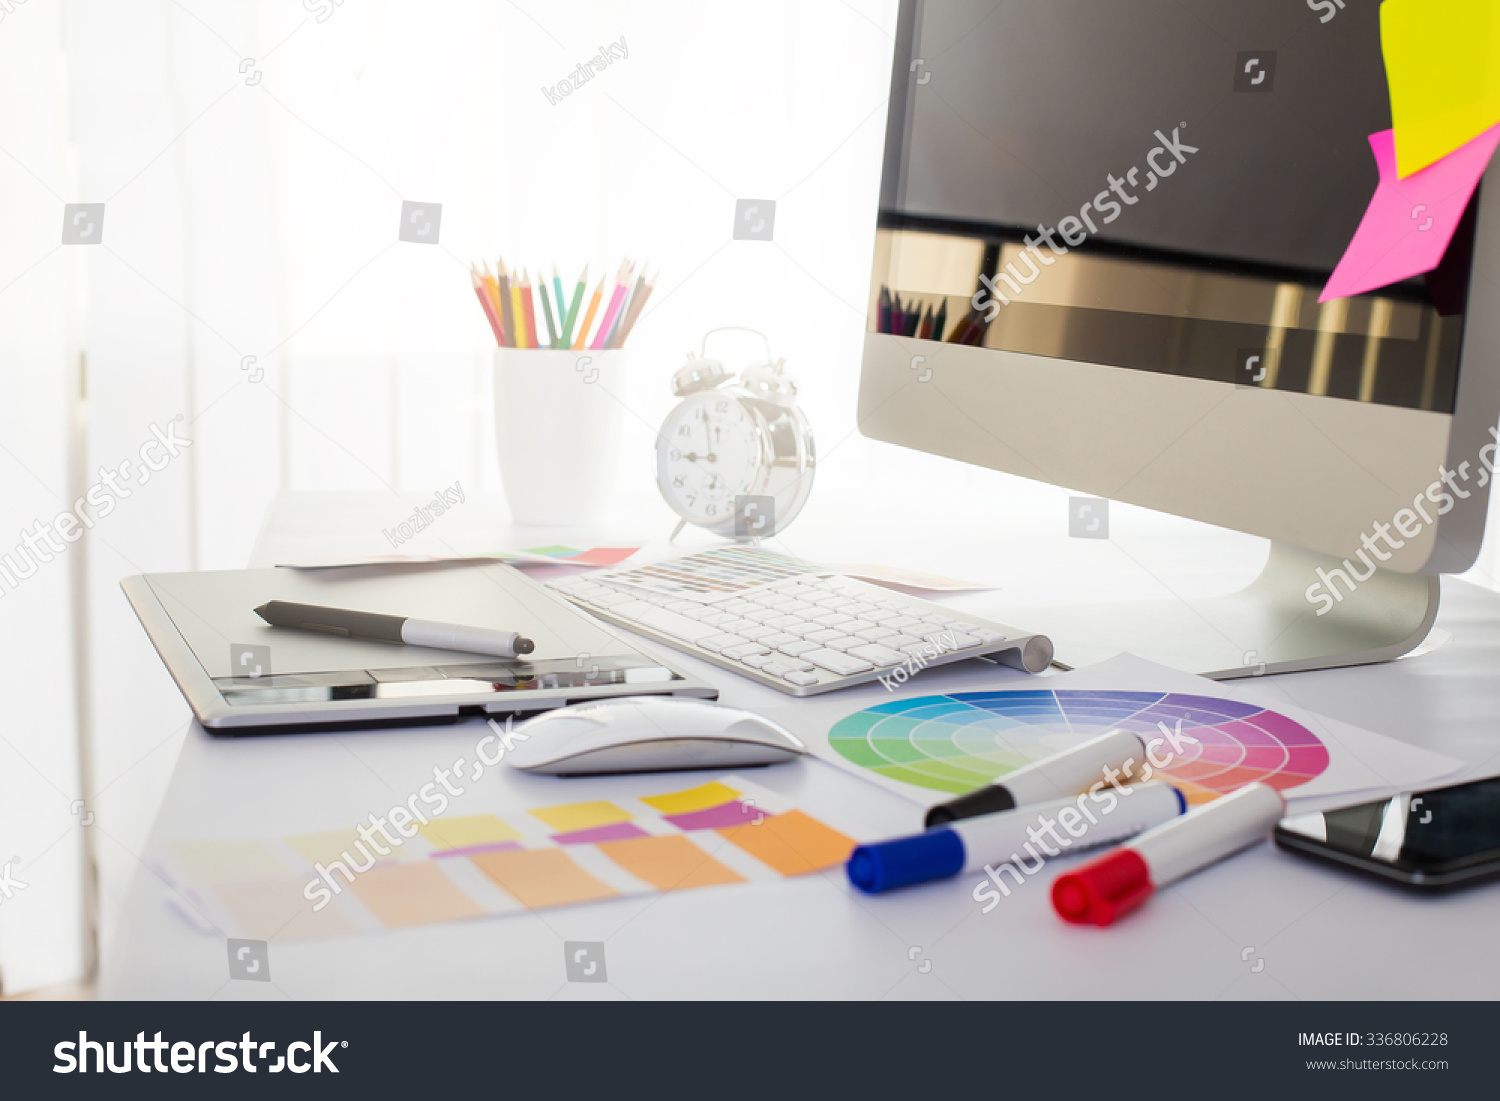 Modern office workplace with digital tablet, notepad, colorful pencils, glasses, in morning #336806228